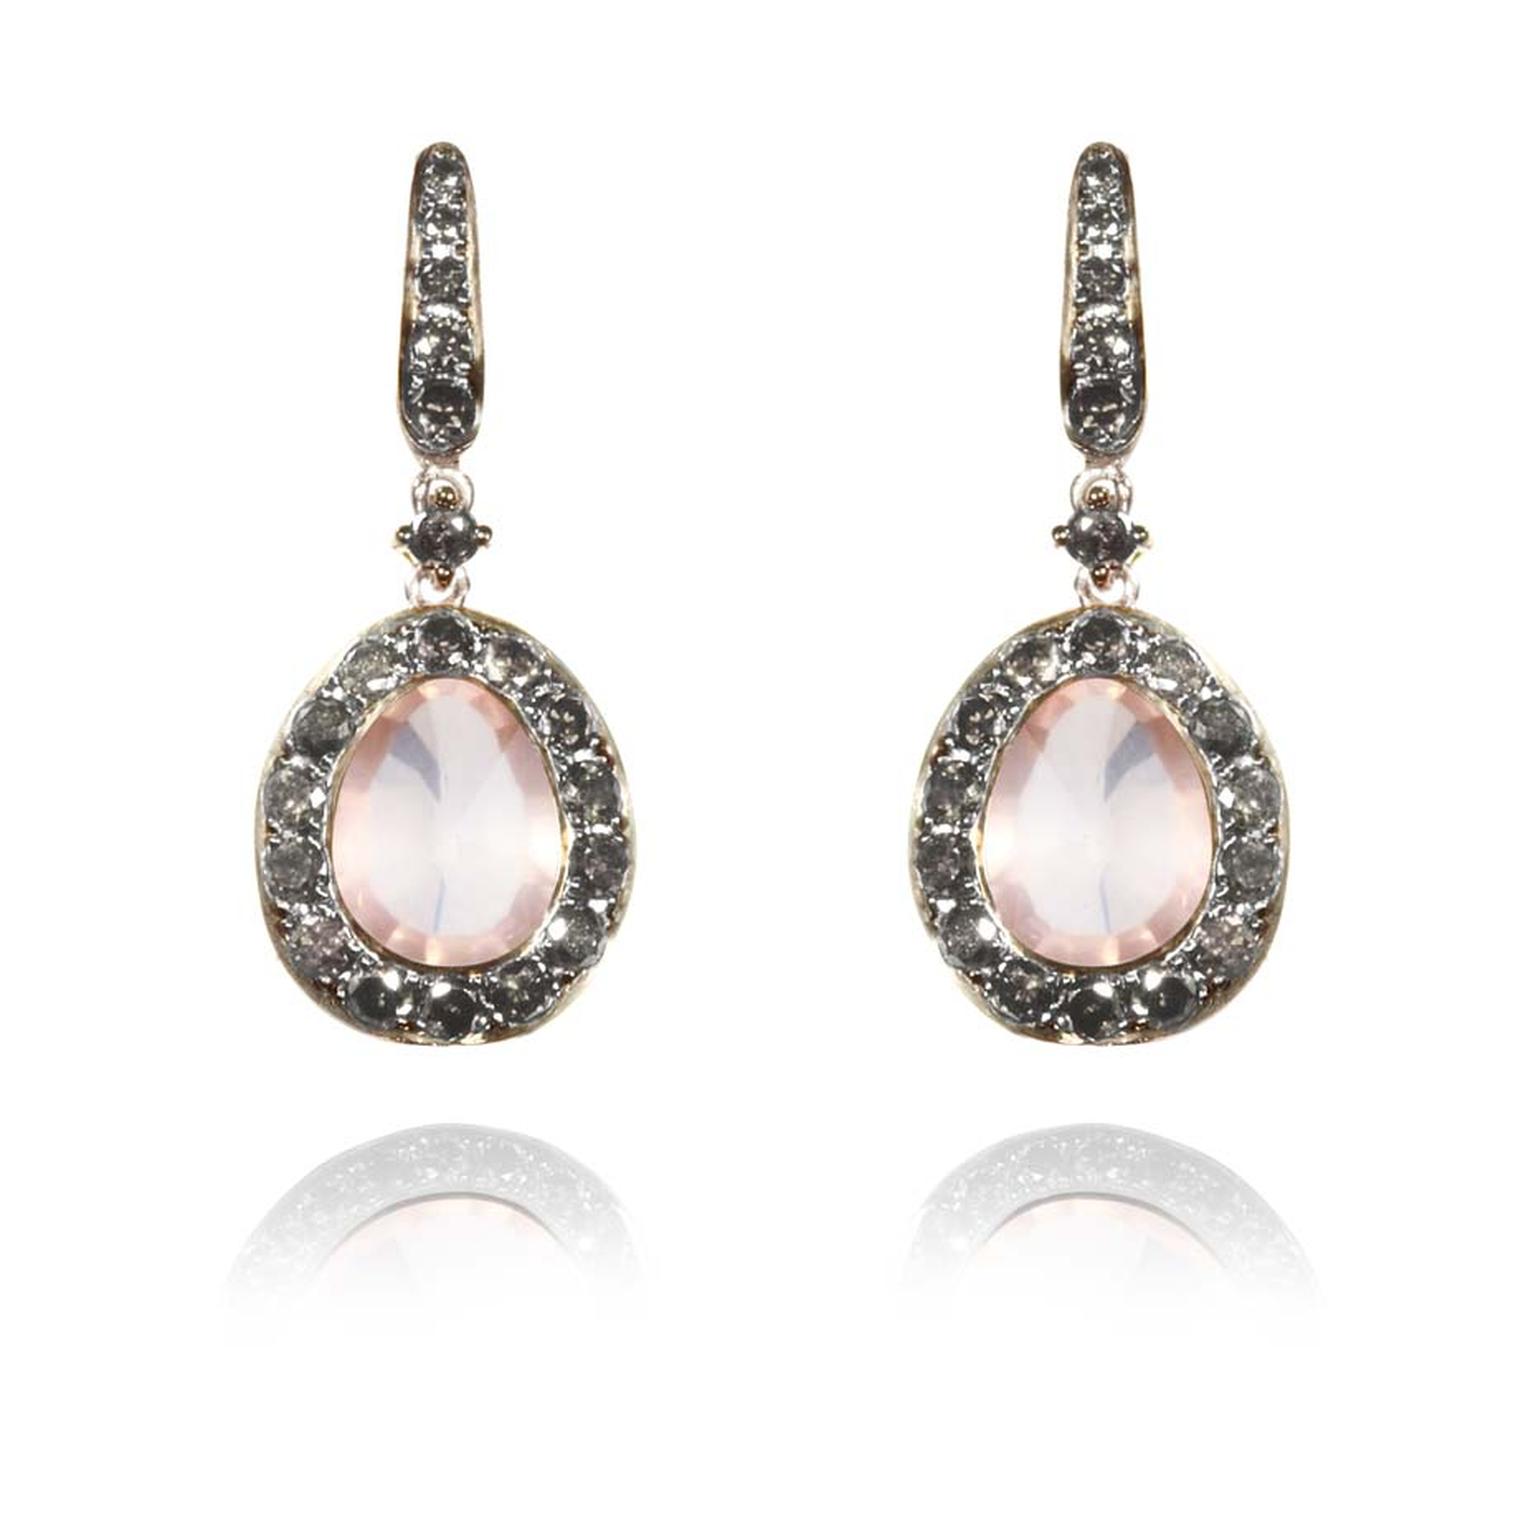 Annouska Dusty Diamonds white gold earrings with silver diamonds and centre rose quartz.